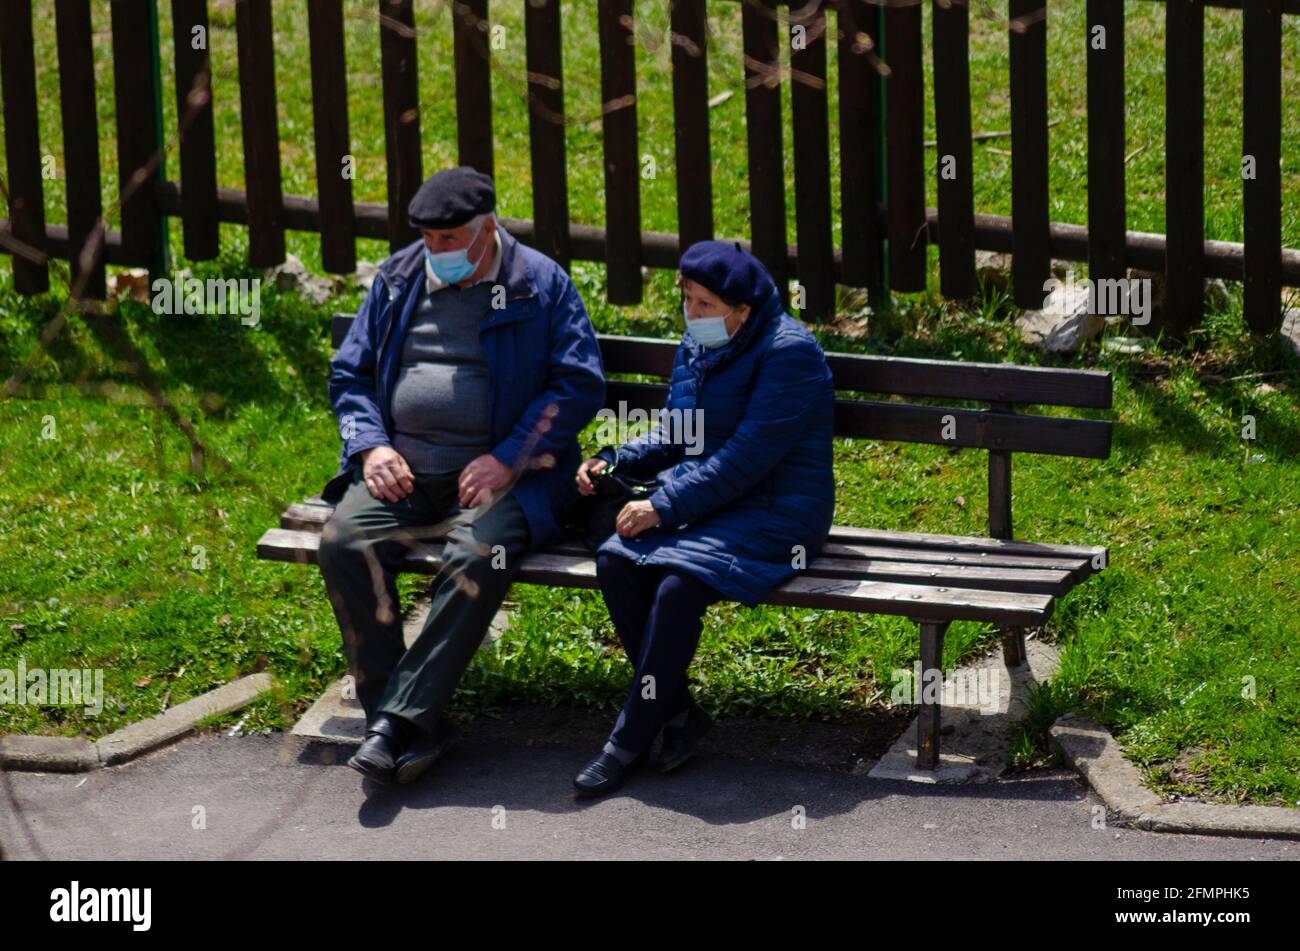 BRASOV, ROMANIA - 17 April 2021 - An elderly couple sit on a bench in Brasov, Romania. Despite an increasing amount of vaccinations, face masks are th Stock Photo